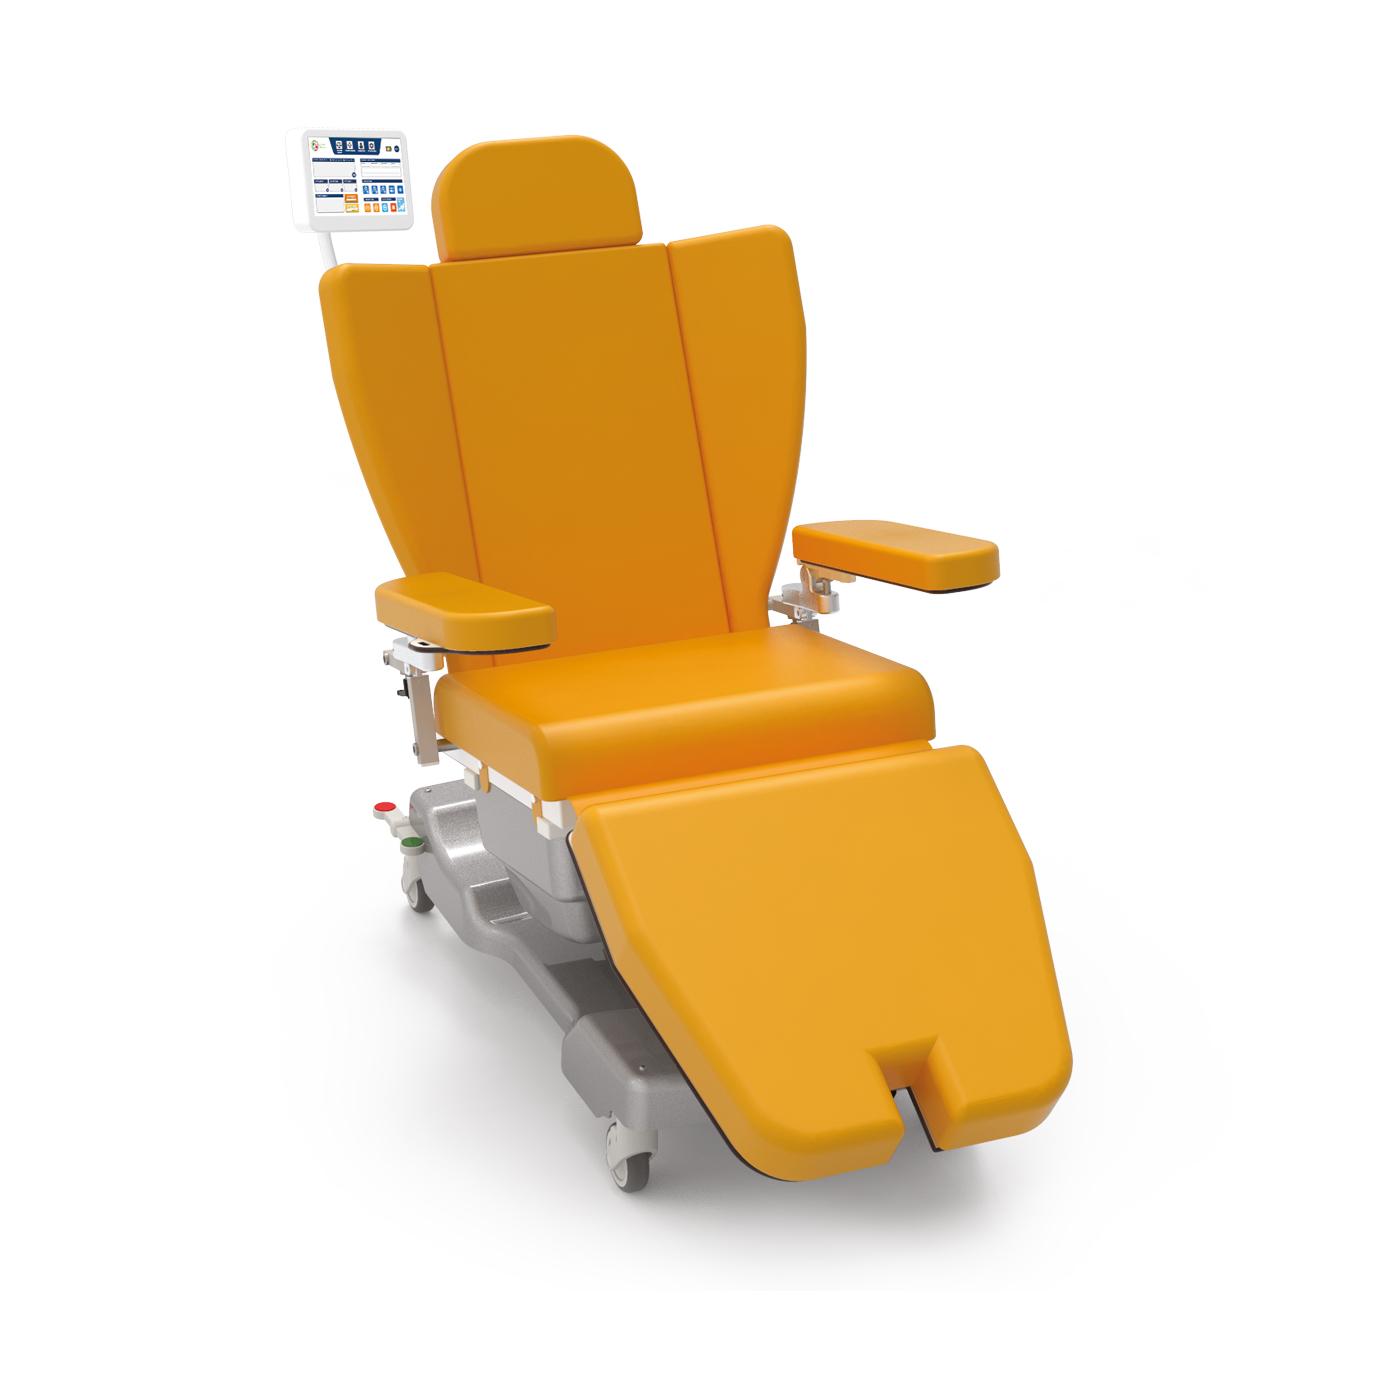 3.Bariatric chair with integrated scale